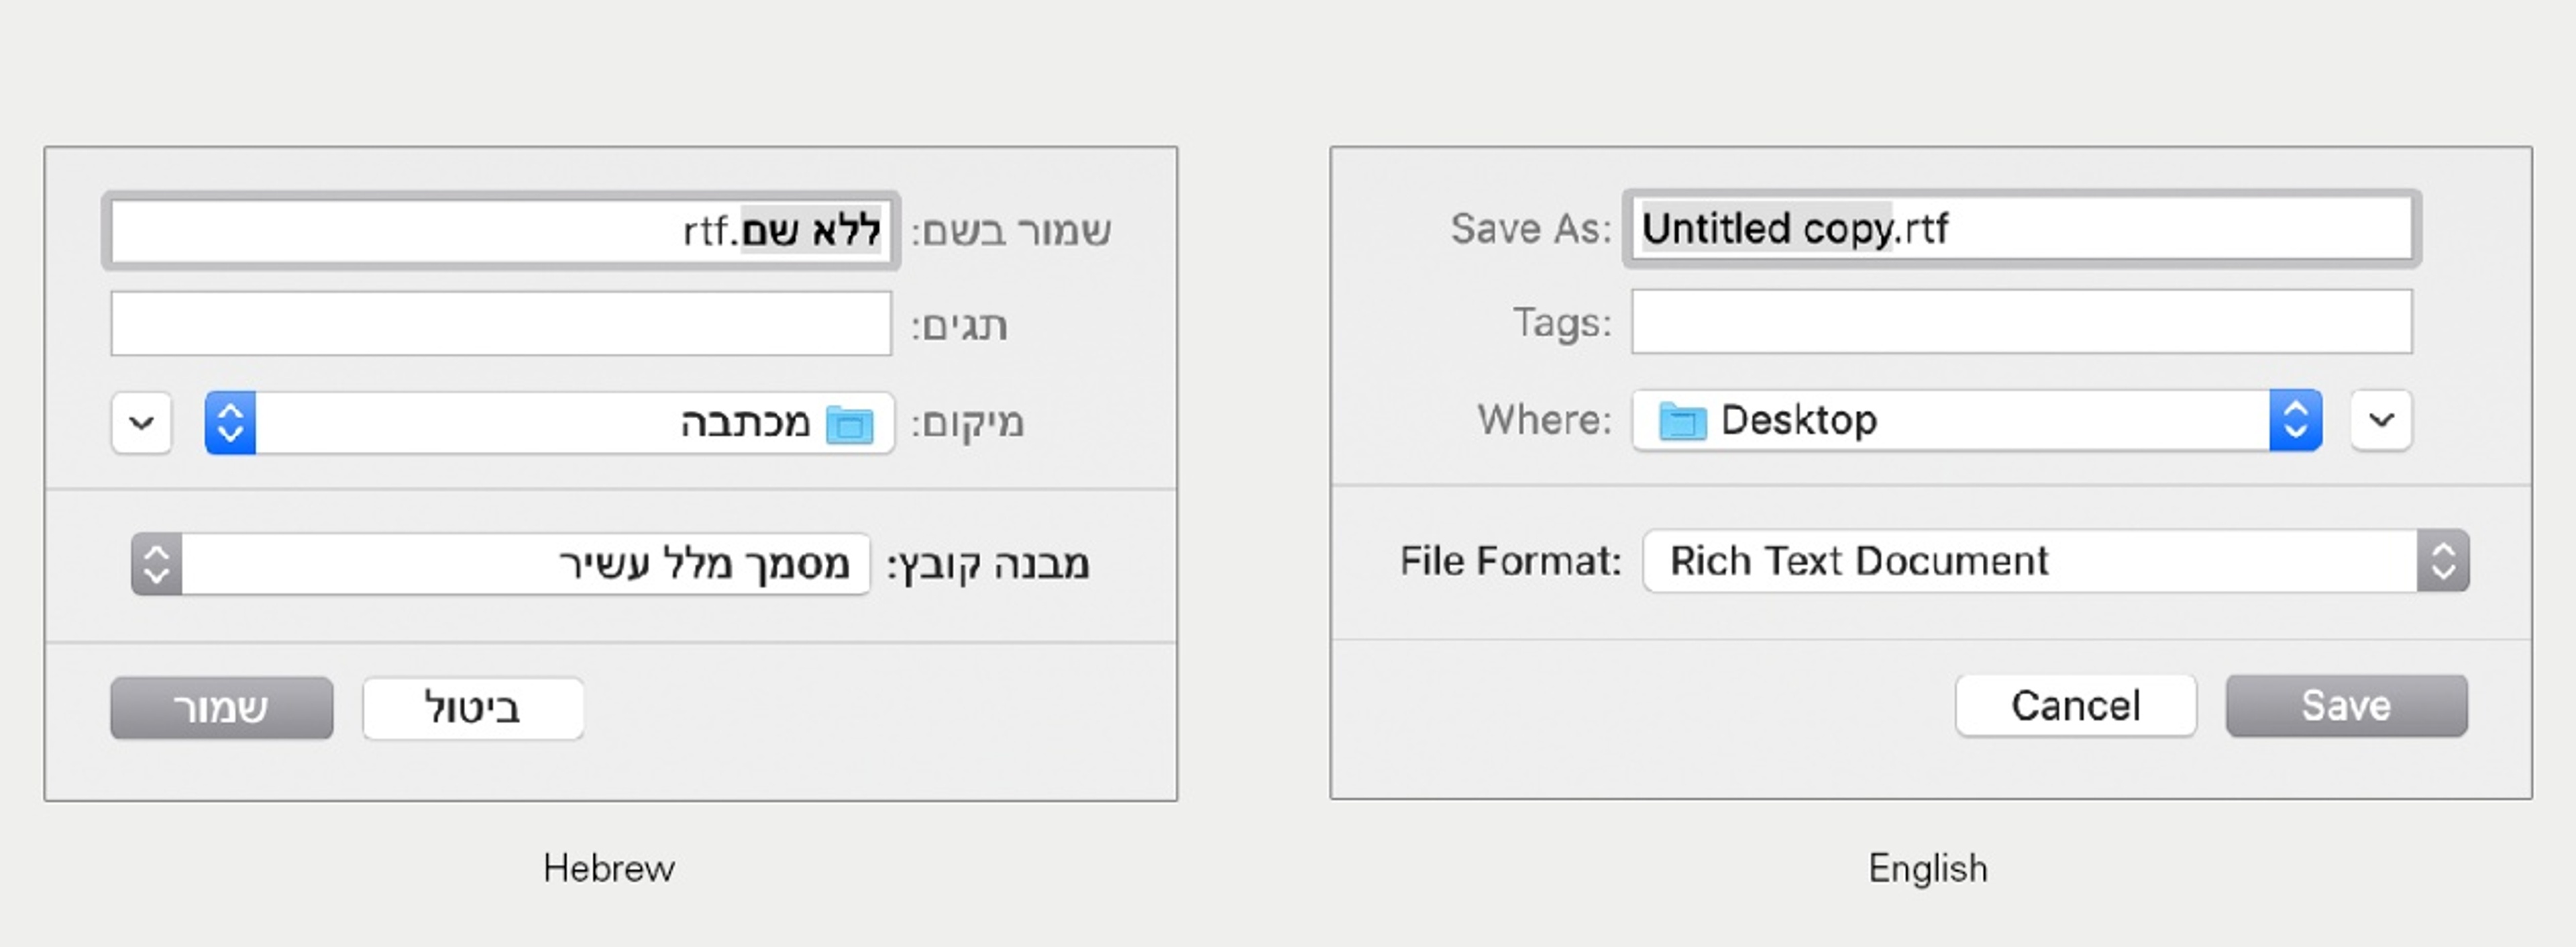 screenshot showing button alignment for English and Hebrew